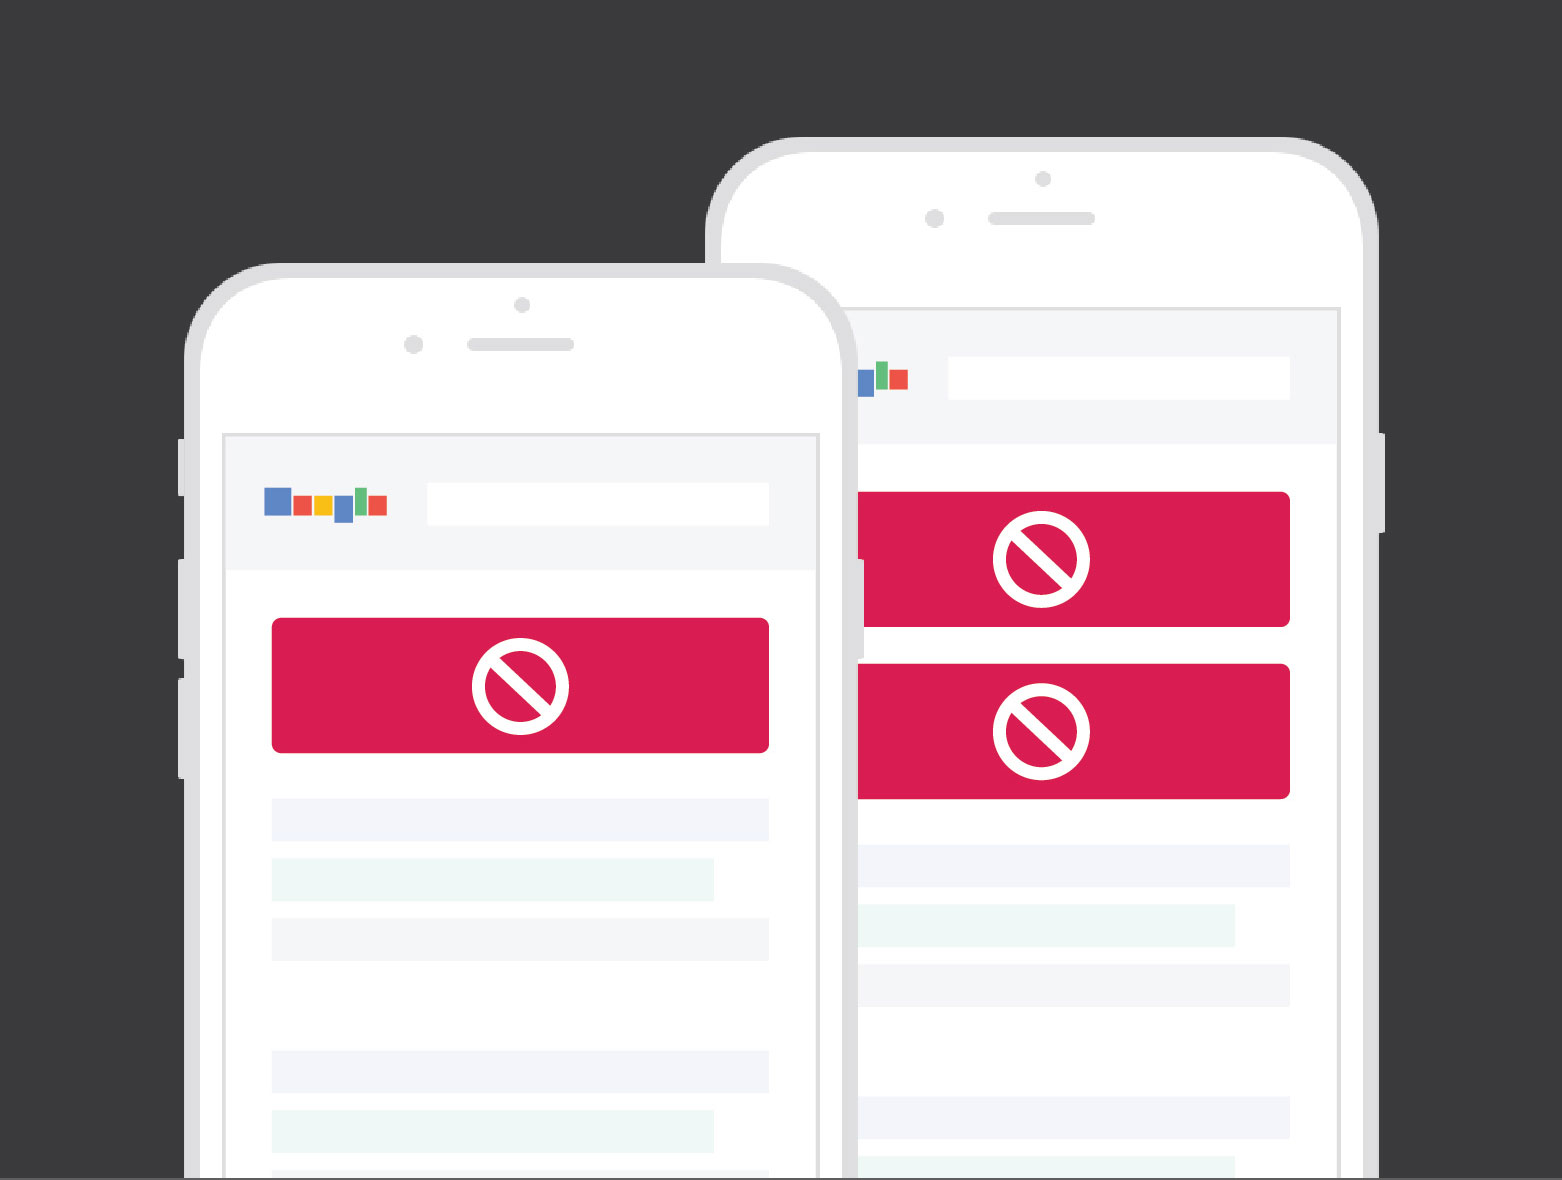 Ad Blockers and the Mobile Web